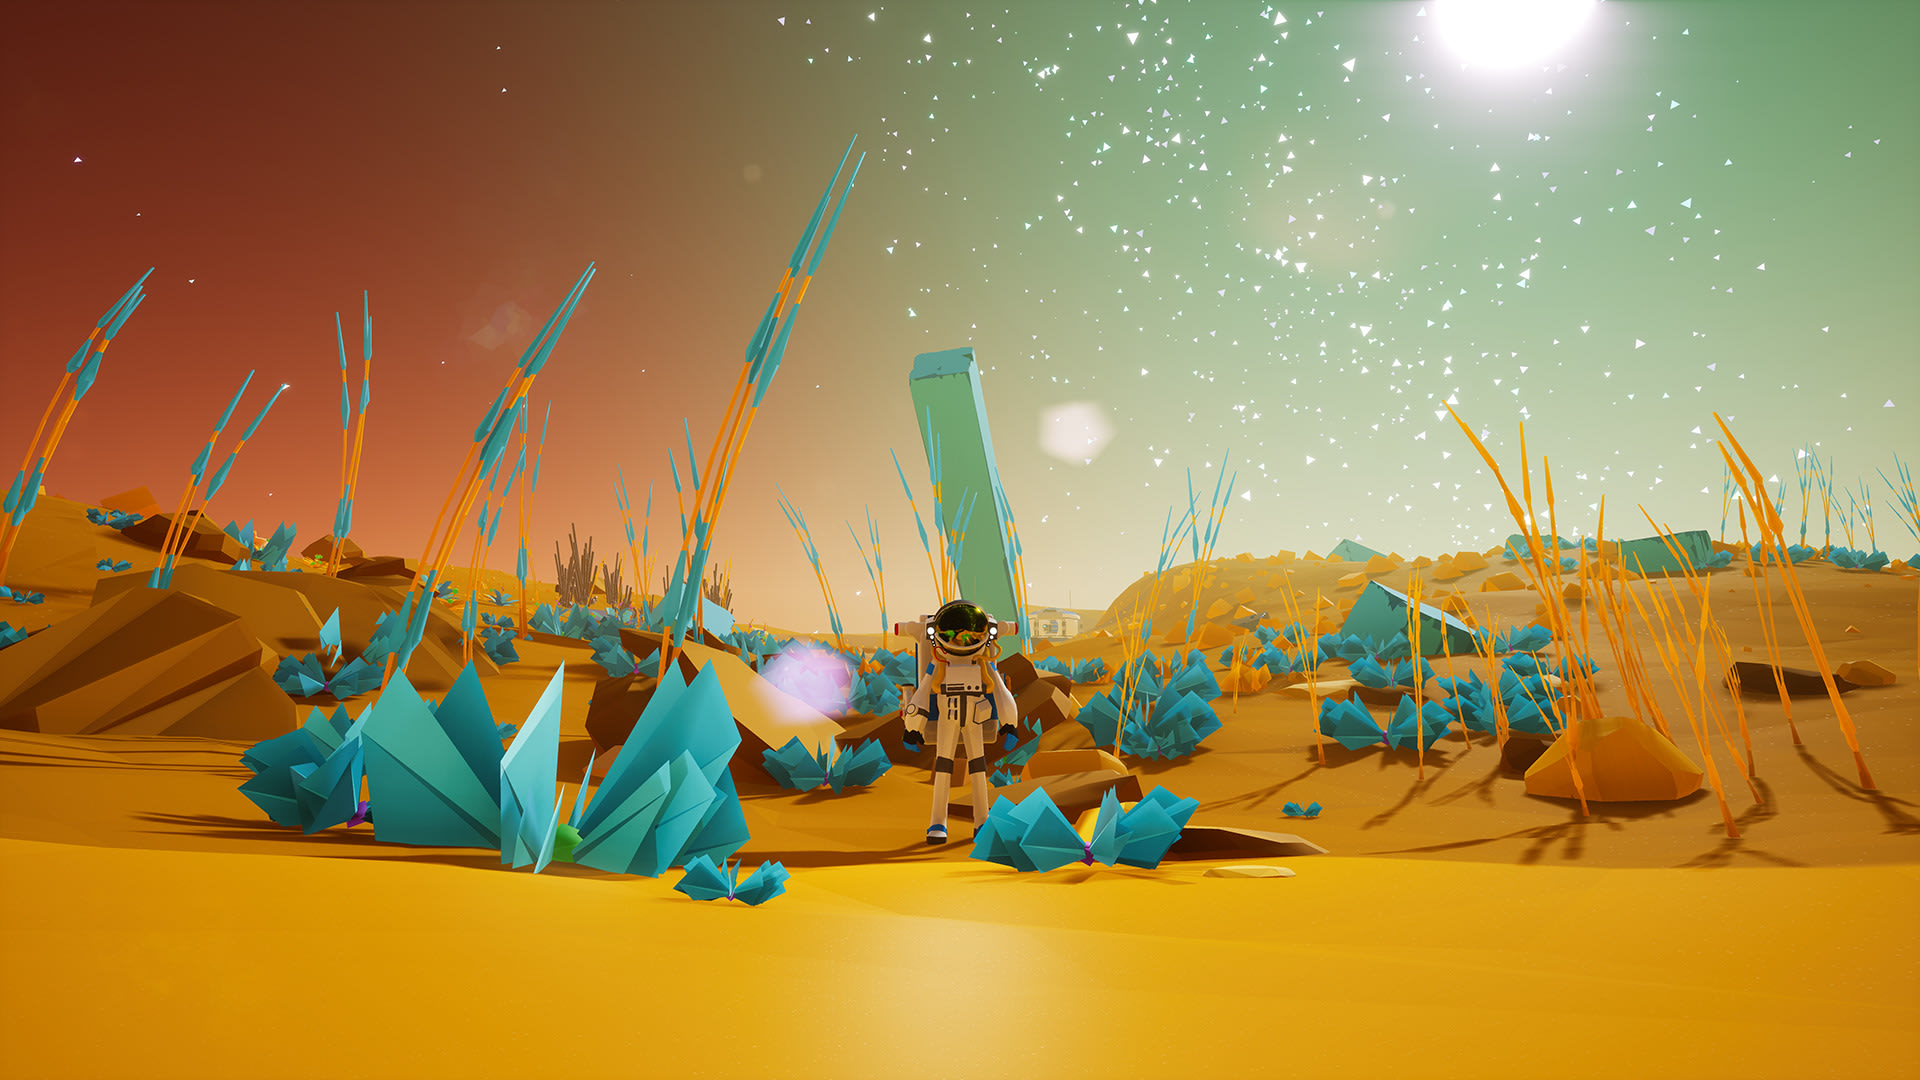 Video Game ASTRONEER HD Wallpaper | Background Image